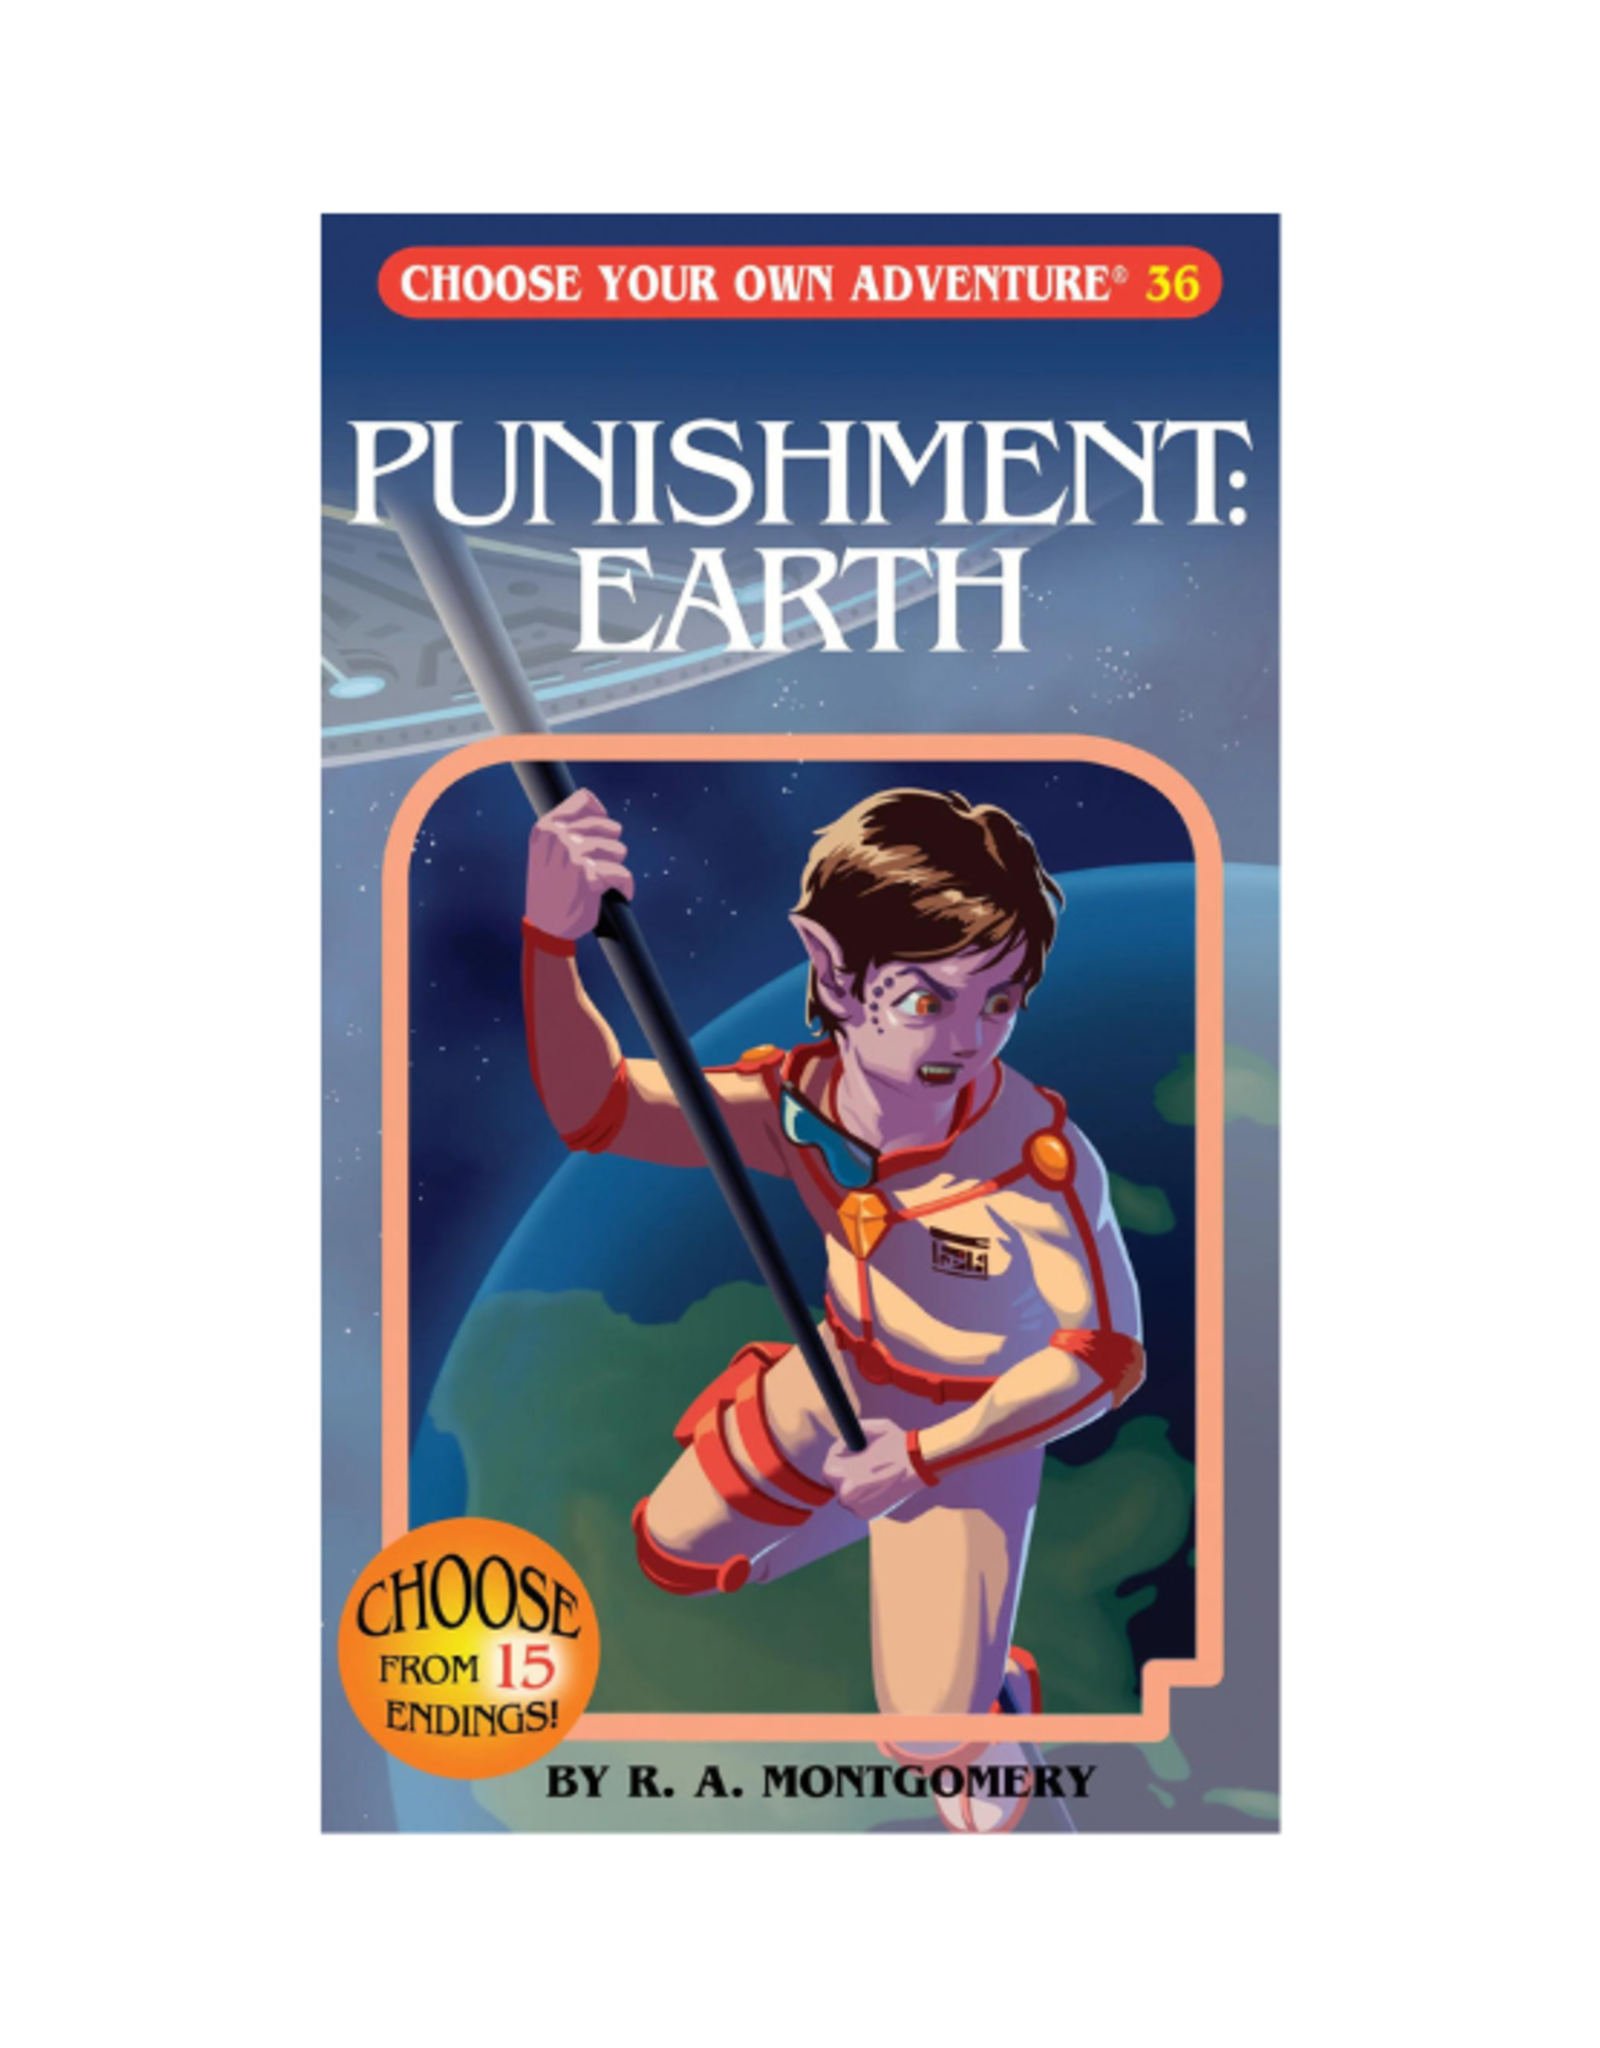 Choose Your Own Adventure Book - Choose Your Own Adventure - Punishment: Earth